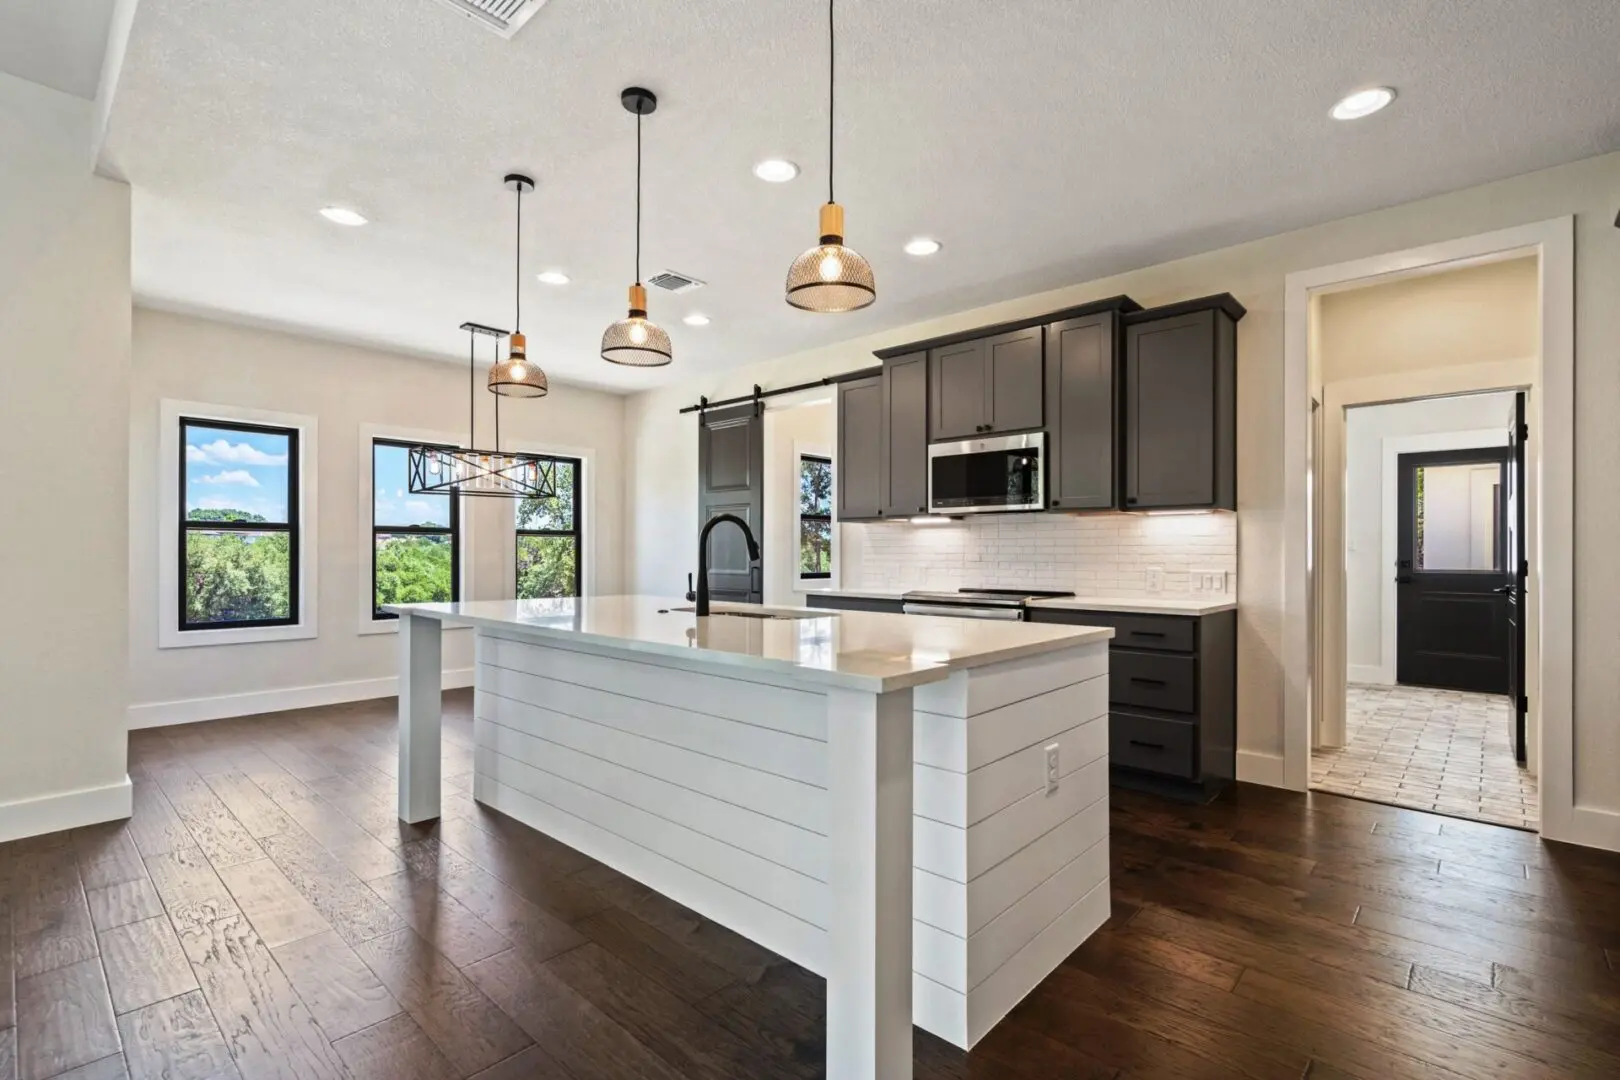 A kitchen with dark wood floors and white cabinets.